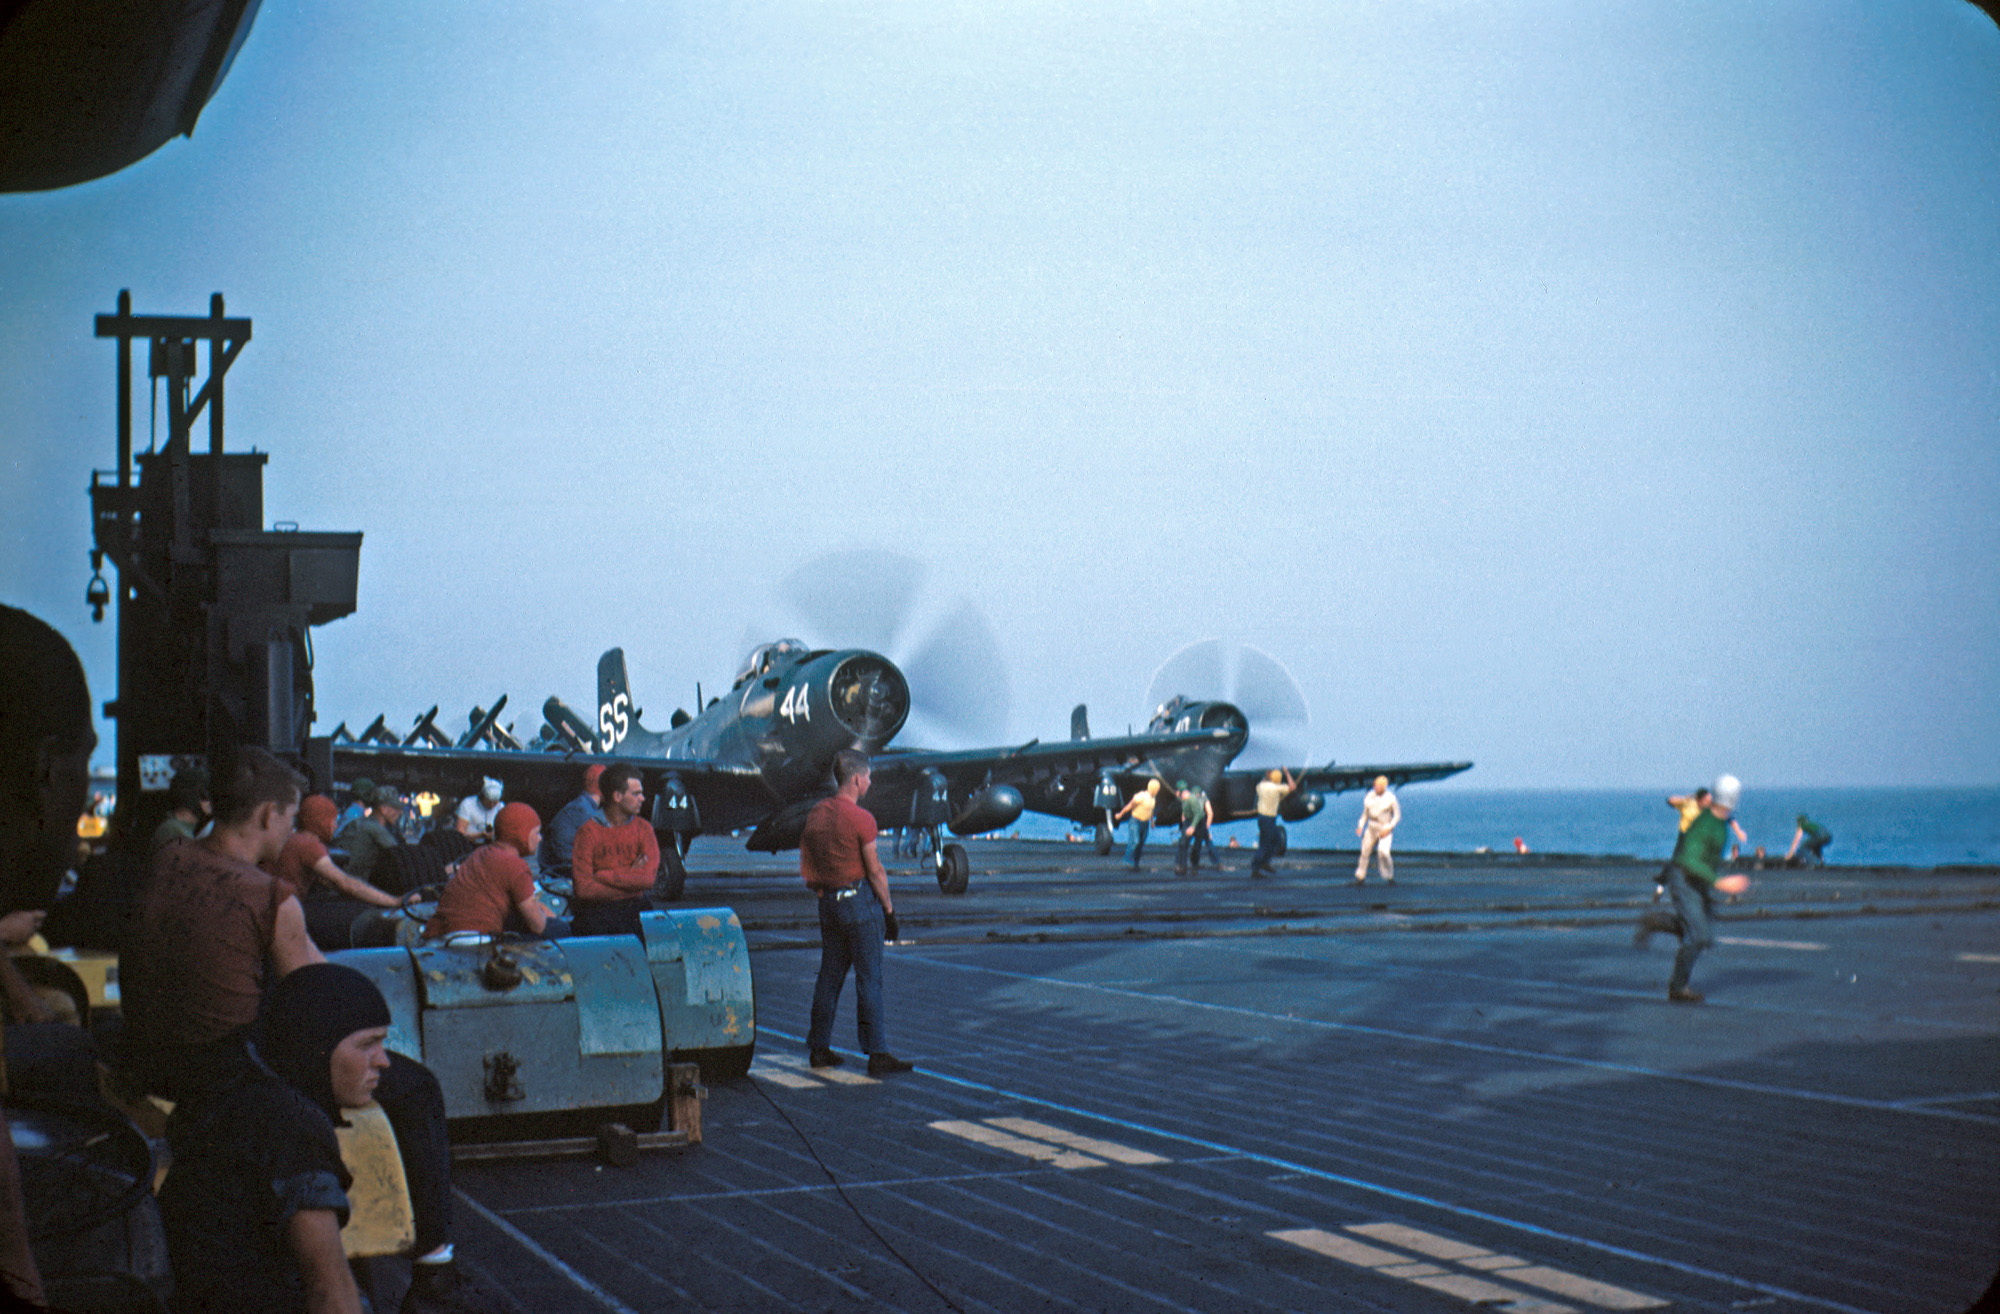 1952. While war rages in Korea, my father, LTJG Don Clark, cruises the Med on the USS Franklin D. Roosevelt (CV-42) as an air controller. He took this picture of the launching of VC-33 (SS tail code) AD-4N's (later known as A-1 Skyraiders). View full size.